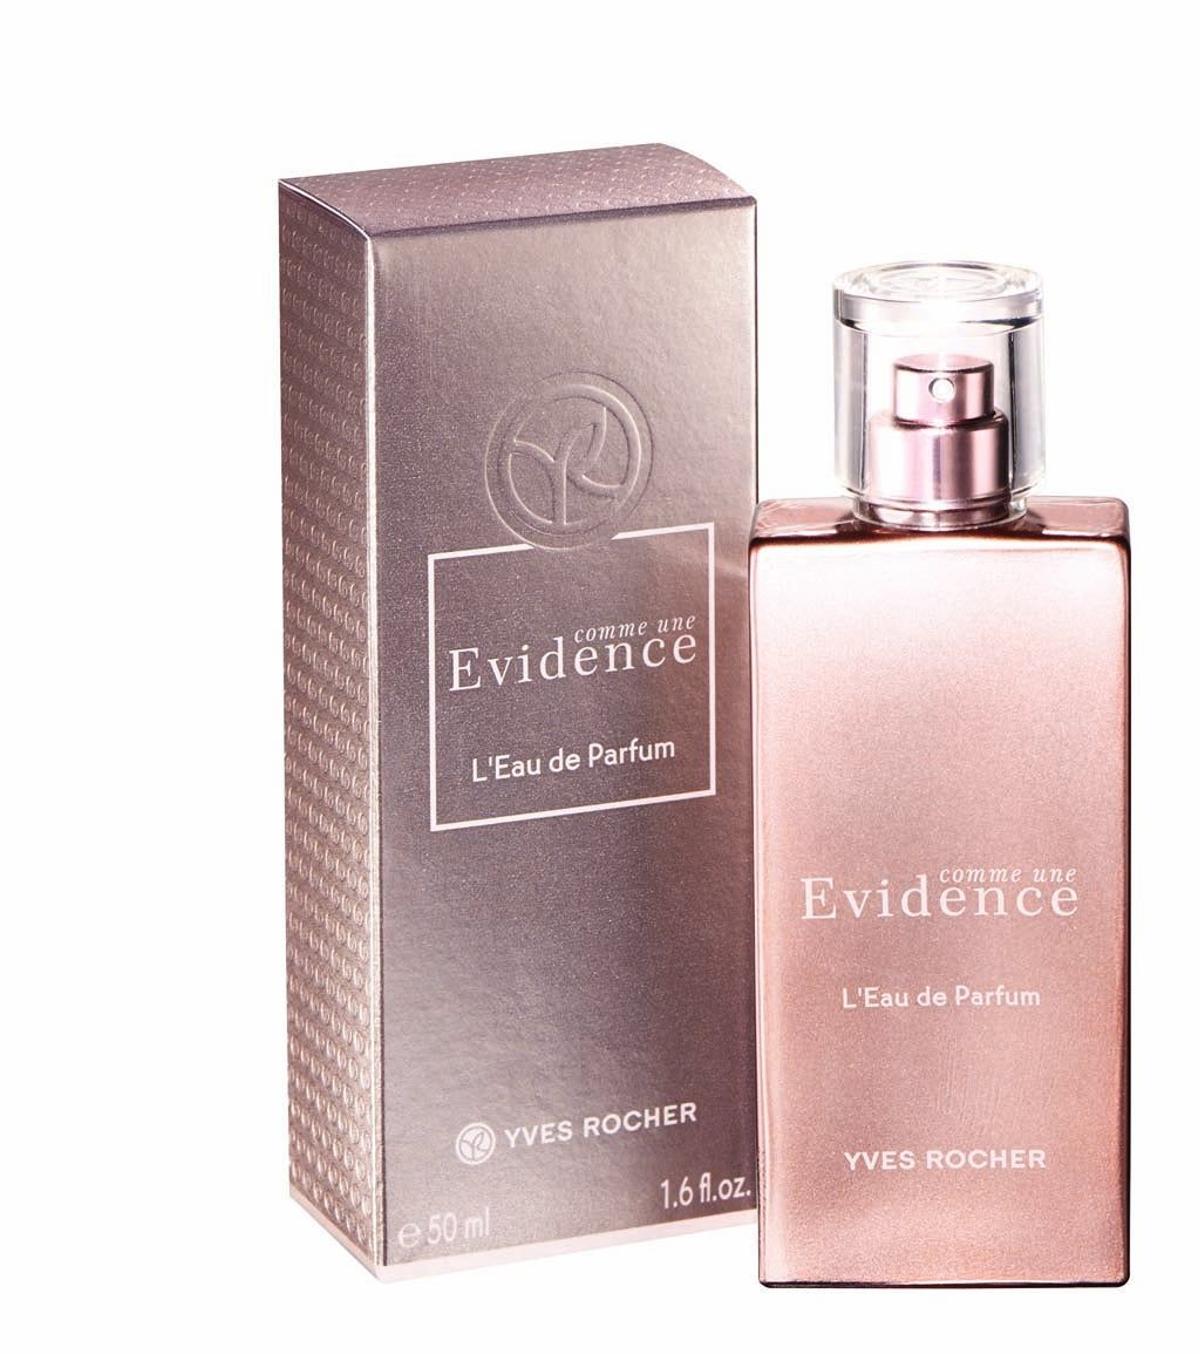 Perfume Comme Une Evidence